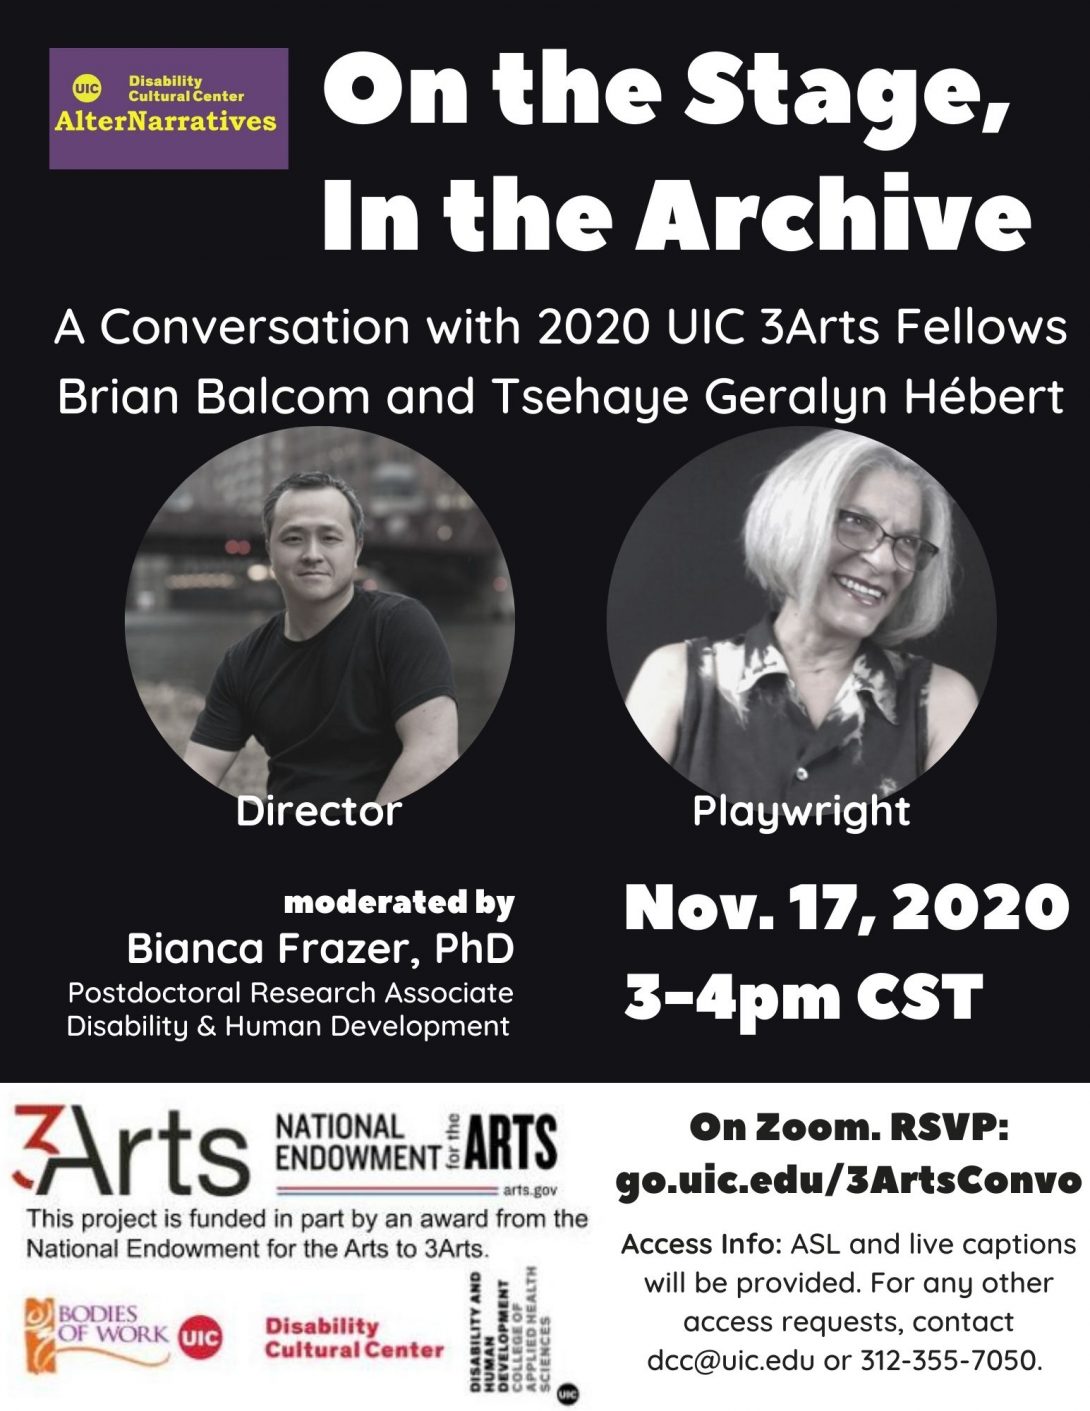 Flyer for On the Stage, In the Archive Conversation with 2020 UIC 3Arts Fellows